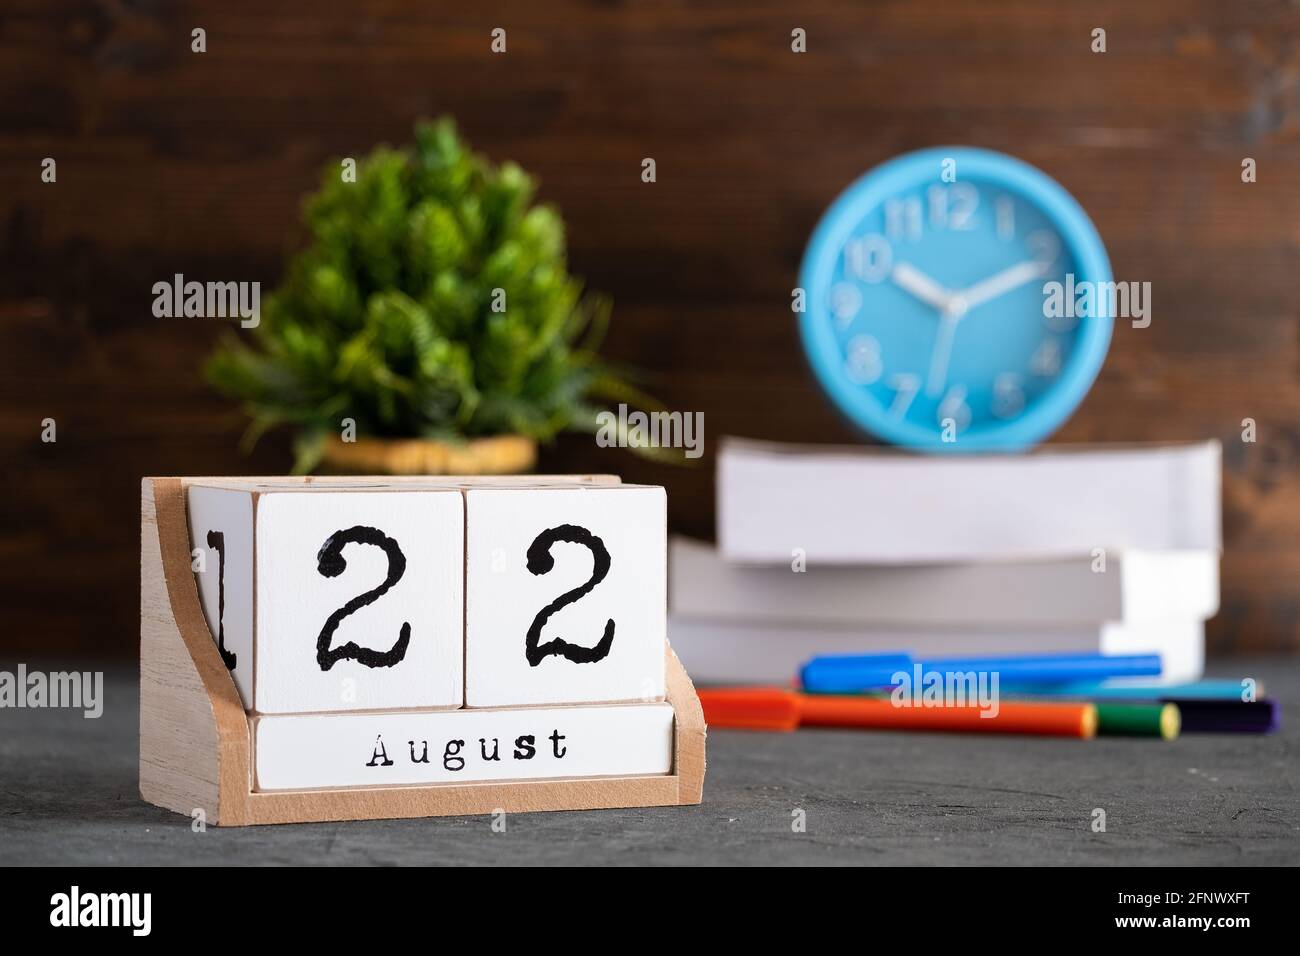 August 22nd. August 22 wooden cube calendar with blur objects on background. Stock Photo